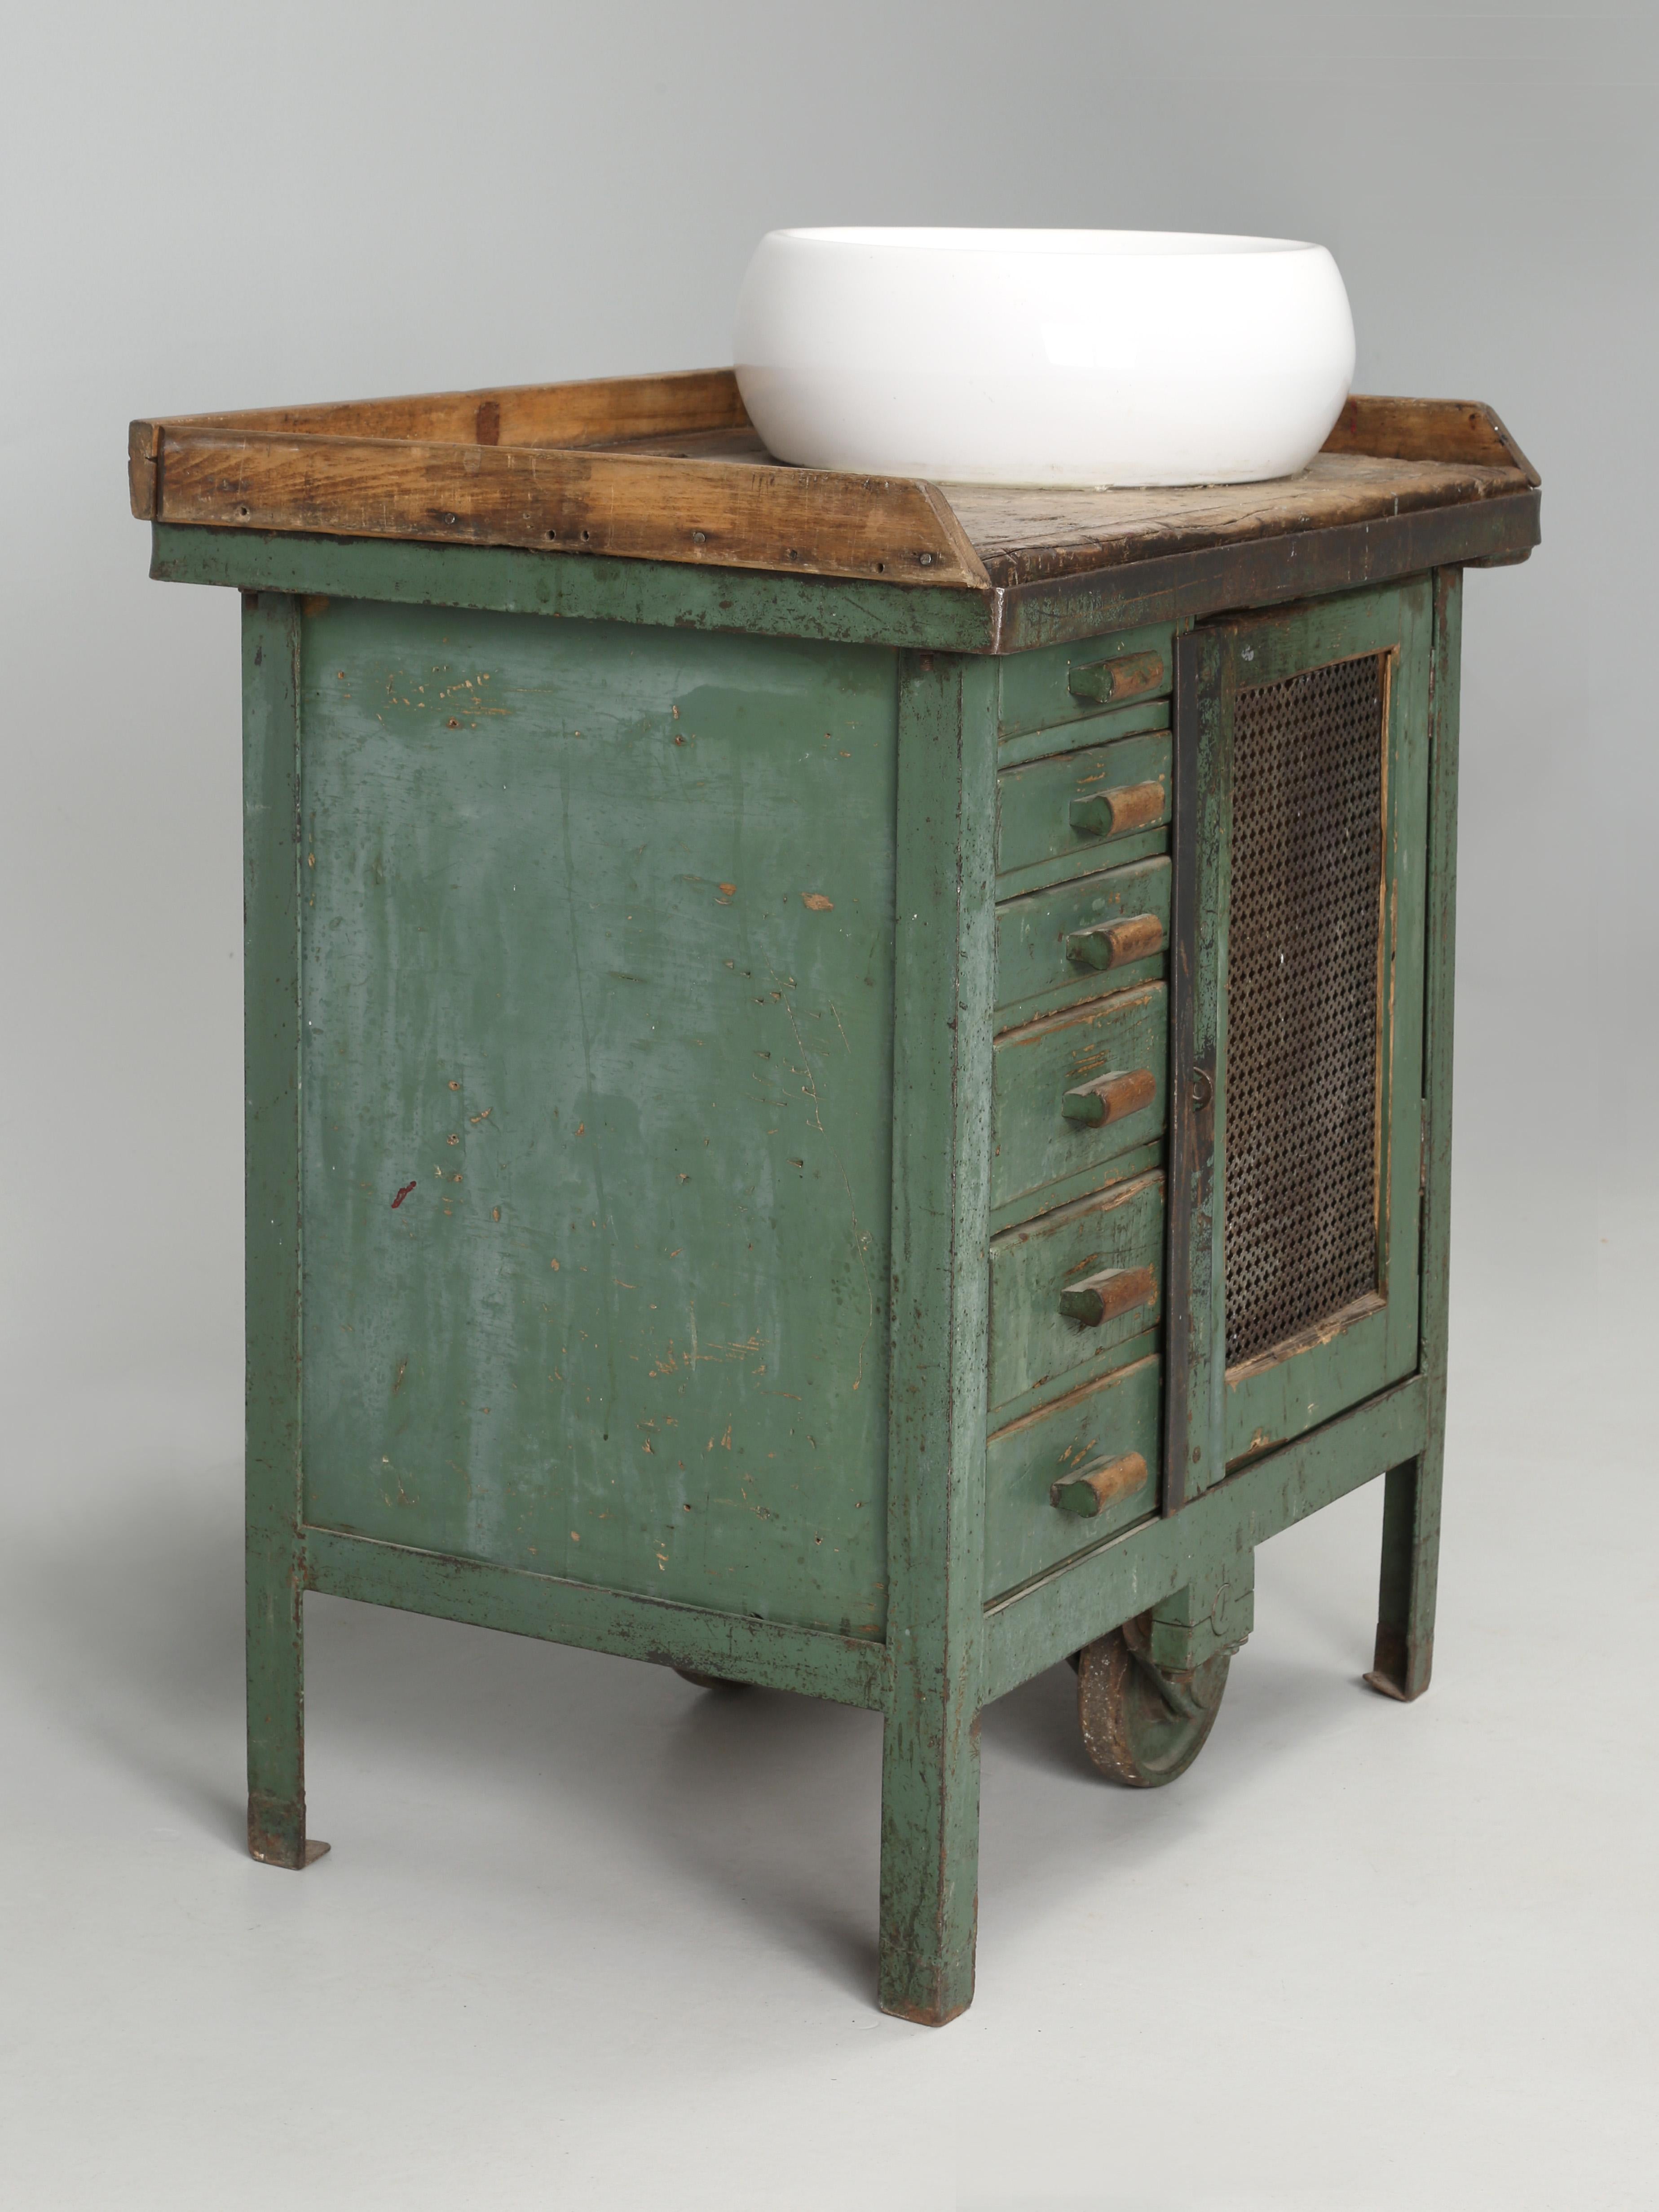 Interesting antique French Industrial cabinet that was probably used at a railroad yard around 1900. Someone started to convert the industrial work cabinet into a bathroom vanity and it's still not too late to either change it back or pick out a